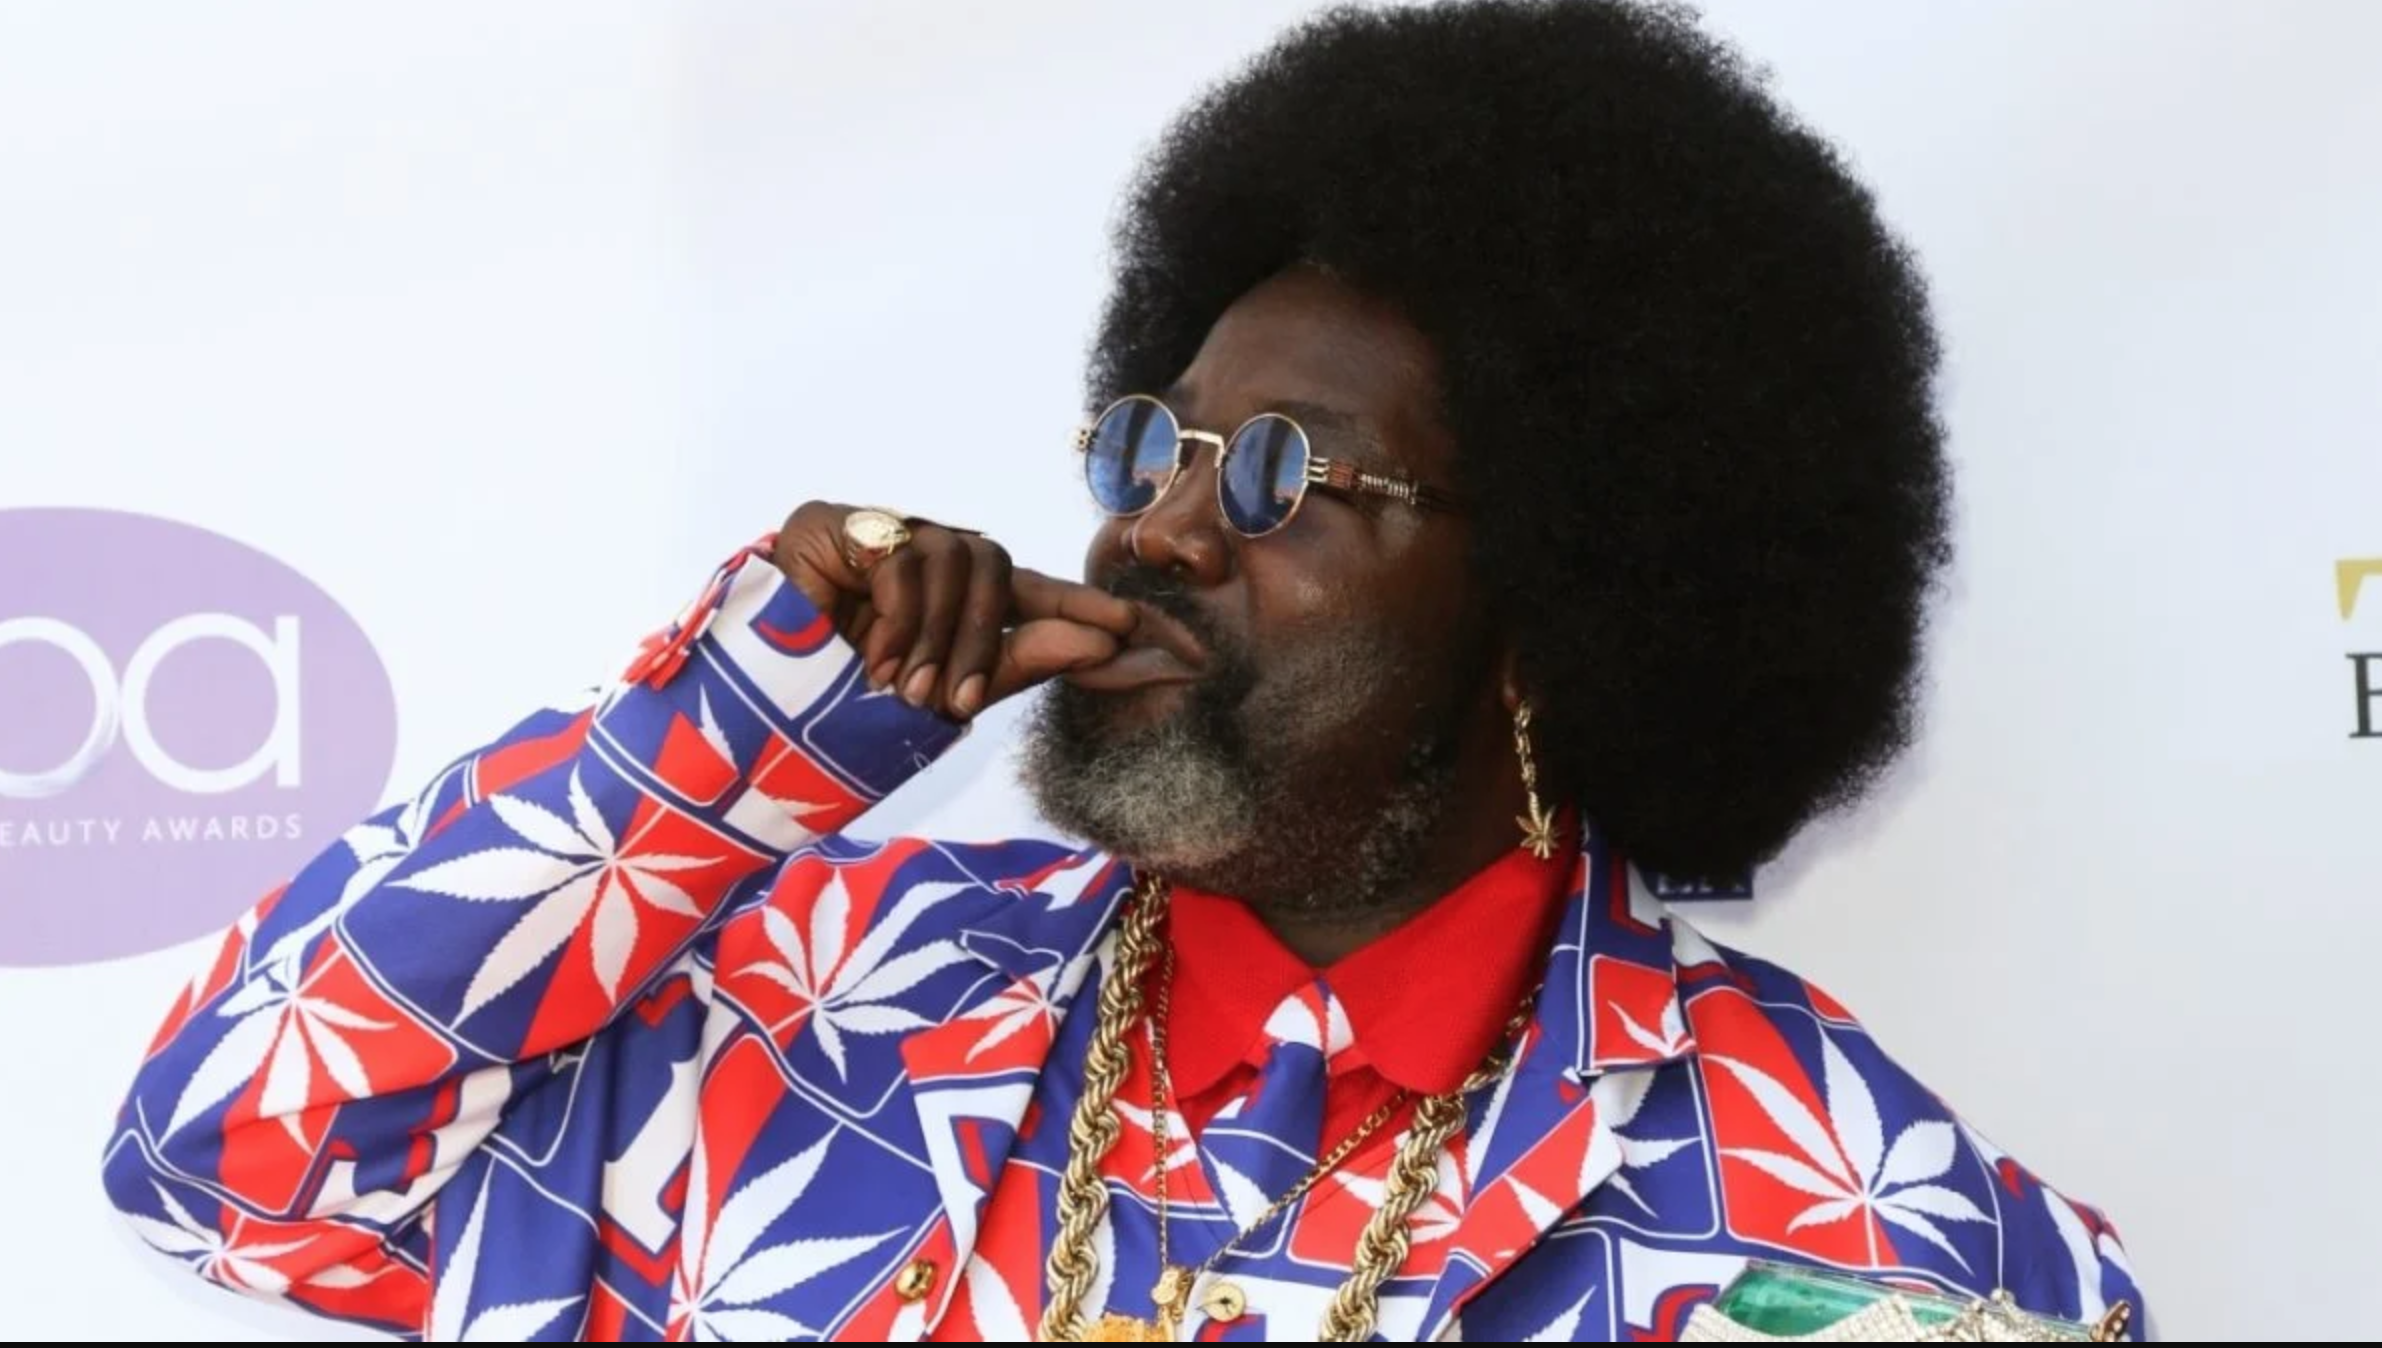 Afroman Runs Into Trouble At Canadian Border After Agents Catch Him With Cannabis